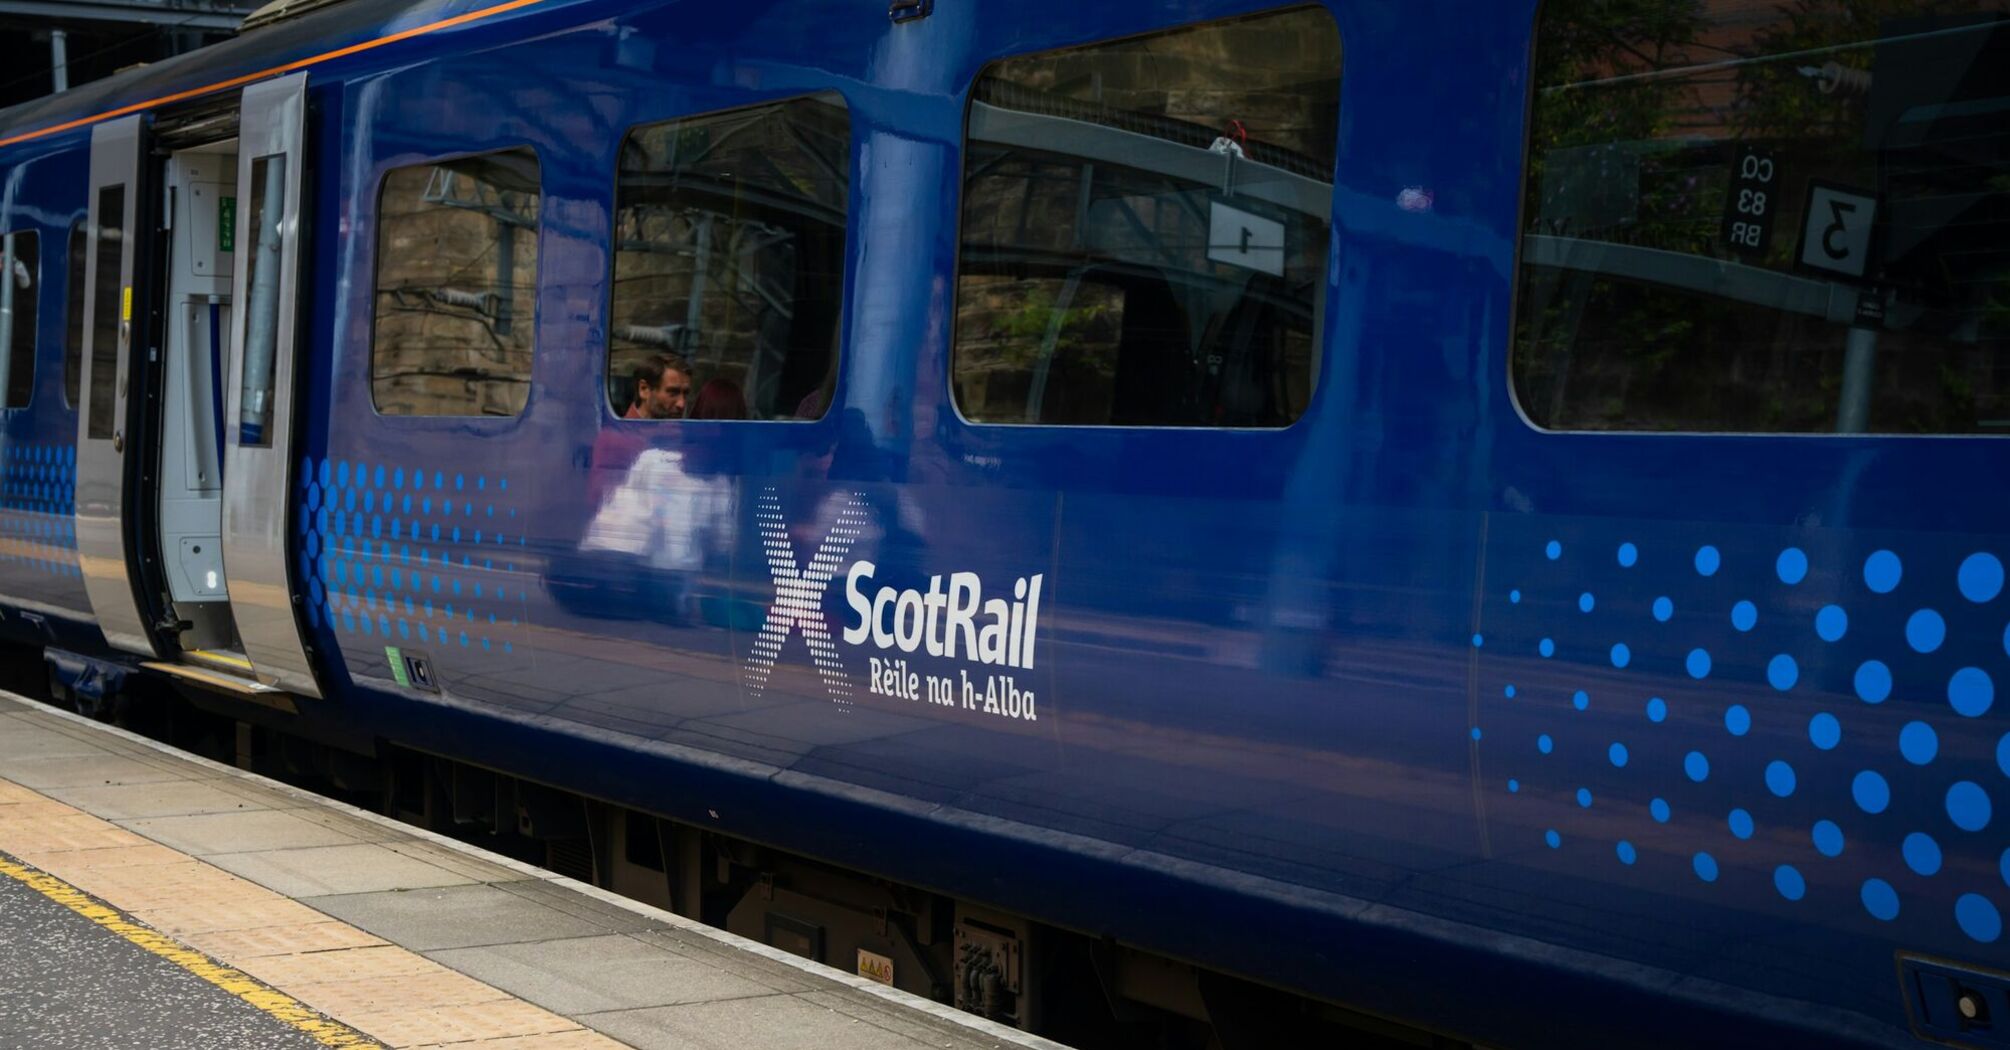 ScotRail train stopped at a station platform, doors open, with passengers visible inside